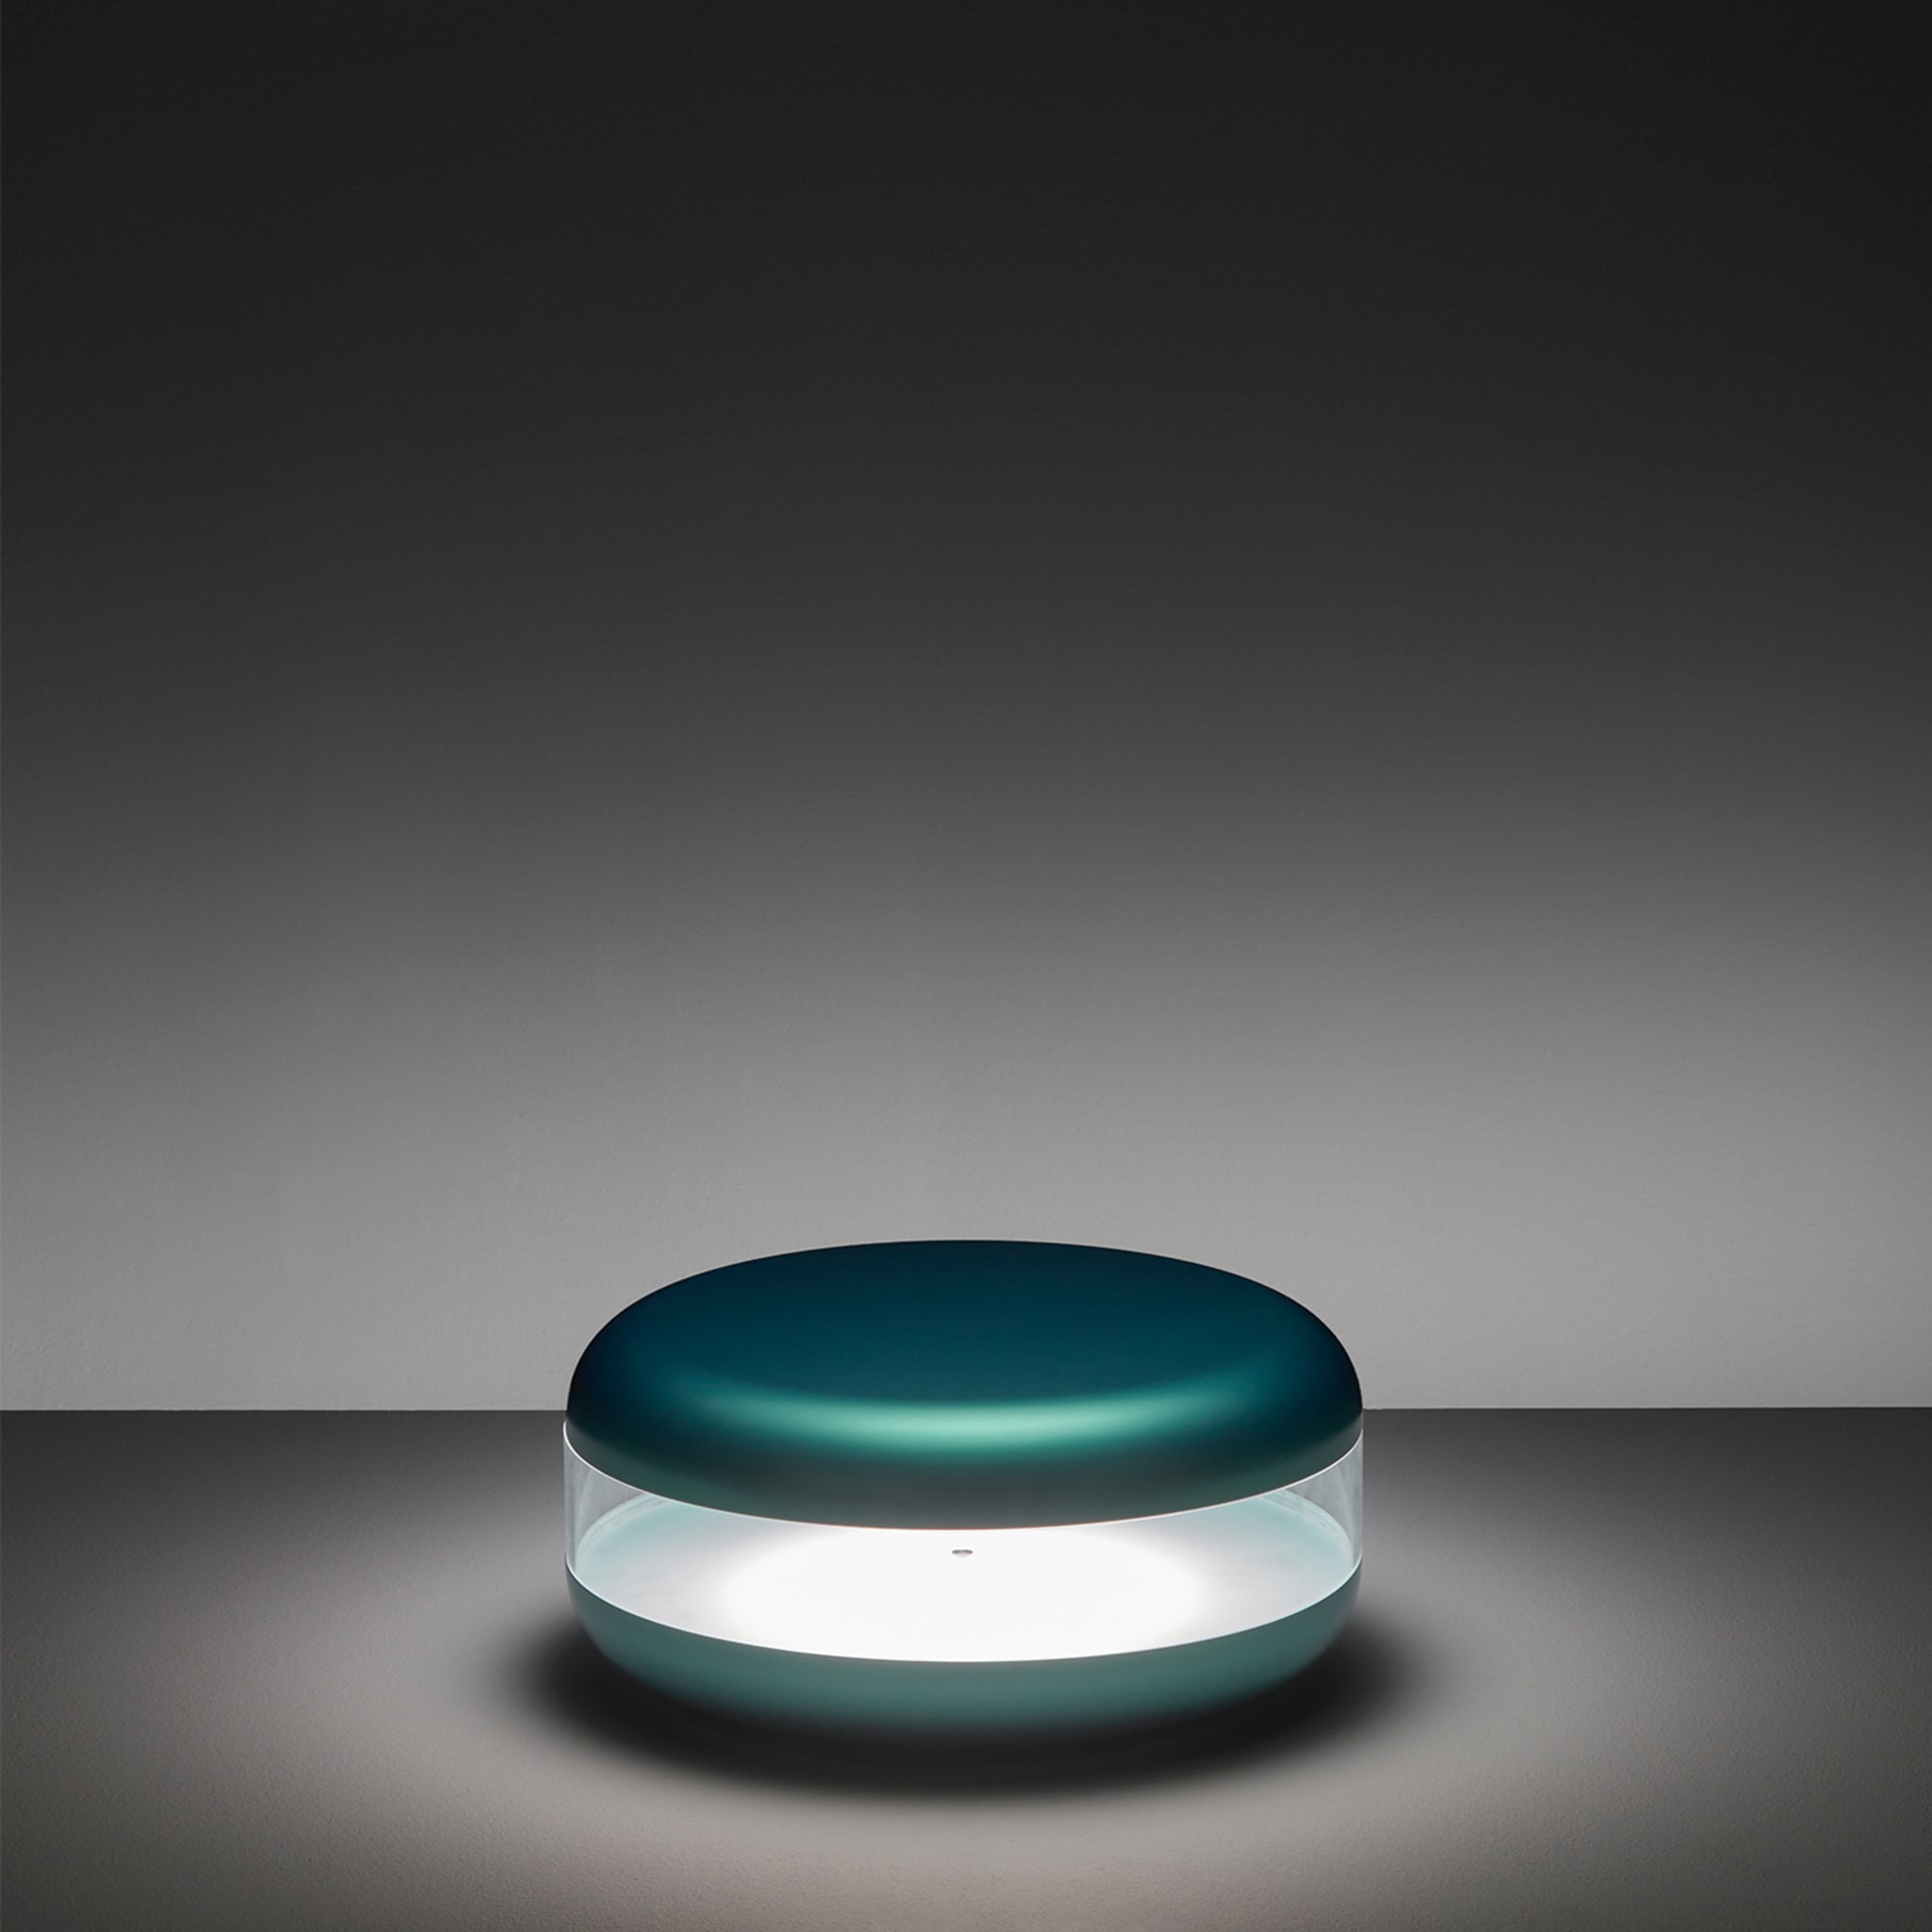 Macaron Green Table Lamp by Parisotto + Formenton - Alternative view 1